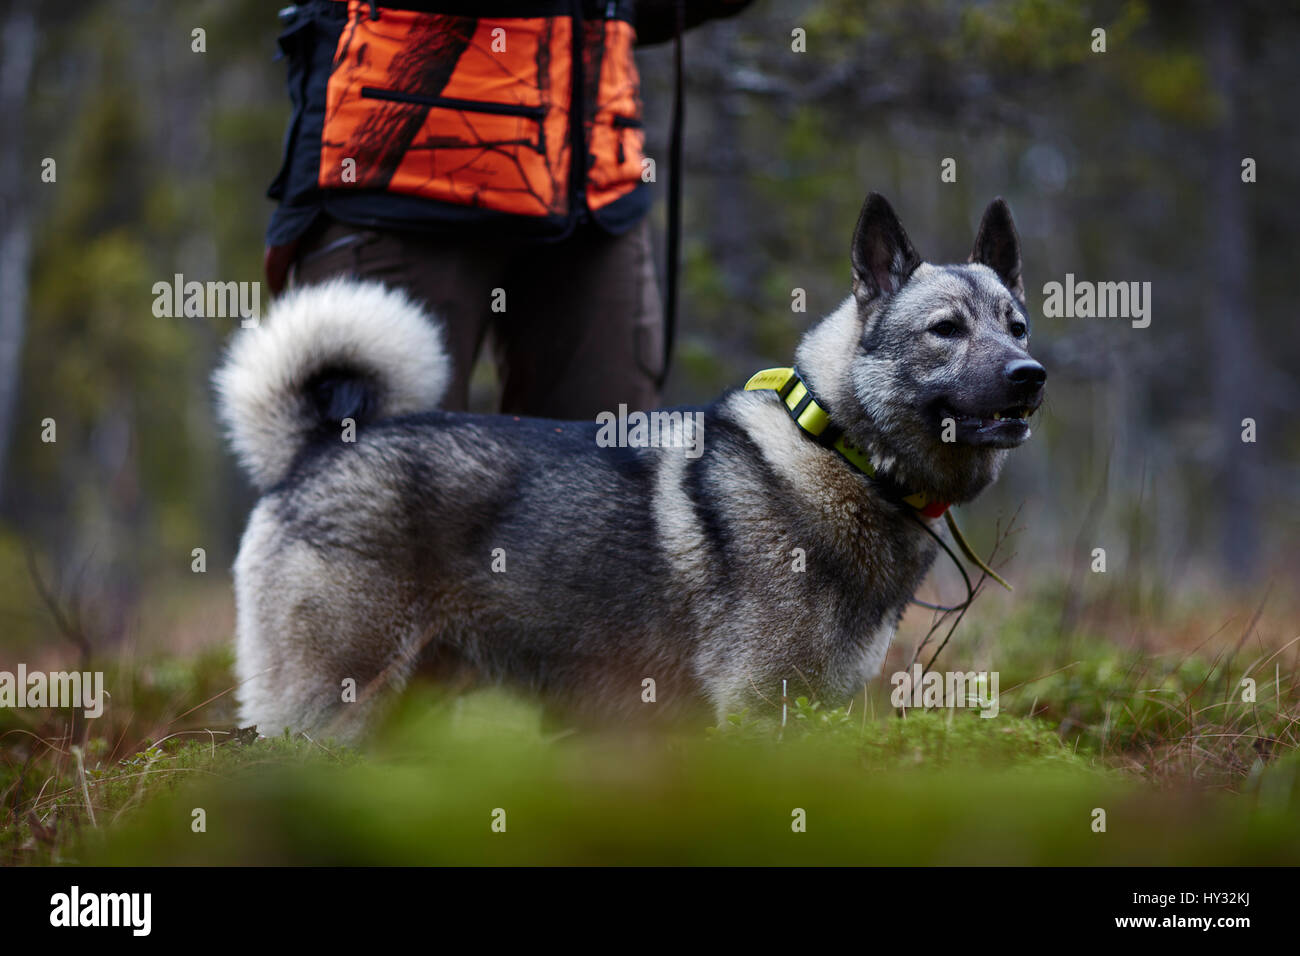 Sweden, Vasterbotten, Female hunter standing with dog (canis lupus familiaris) Stock Photo